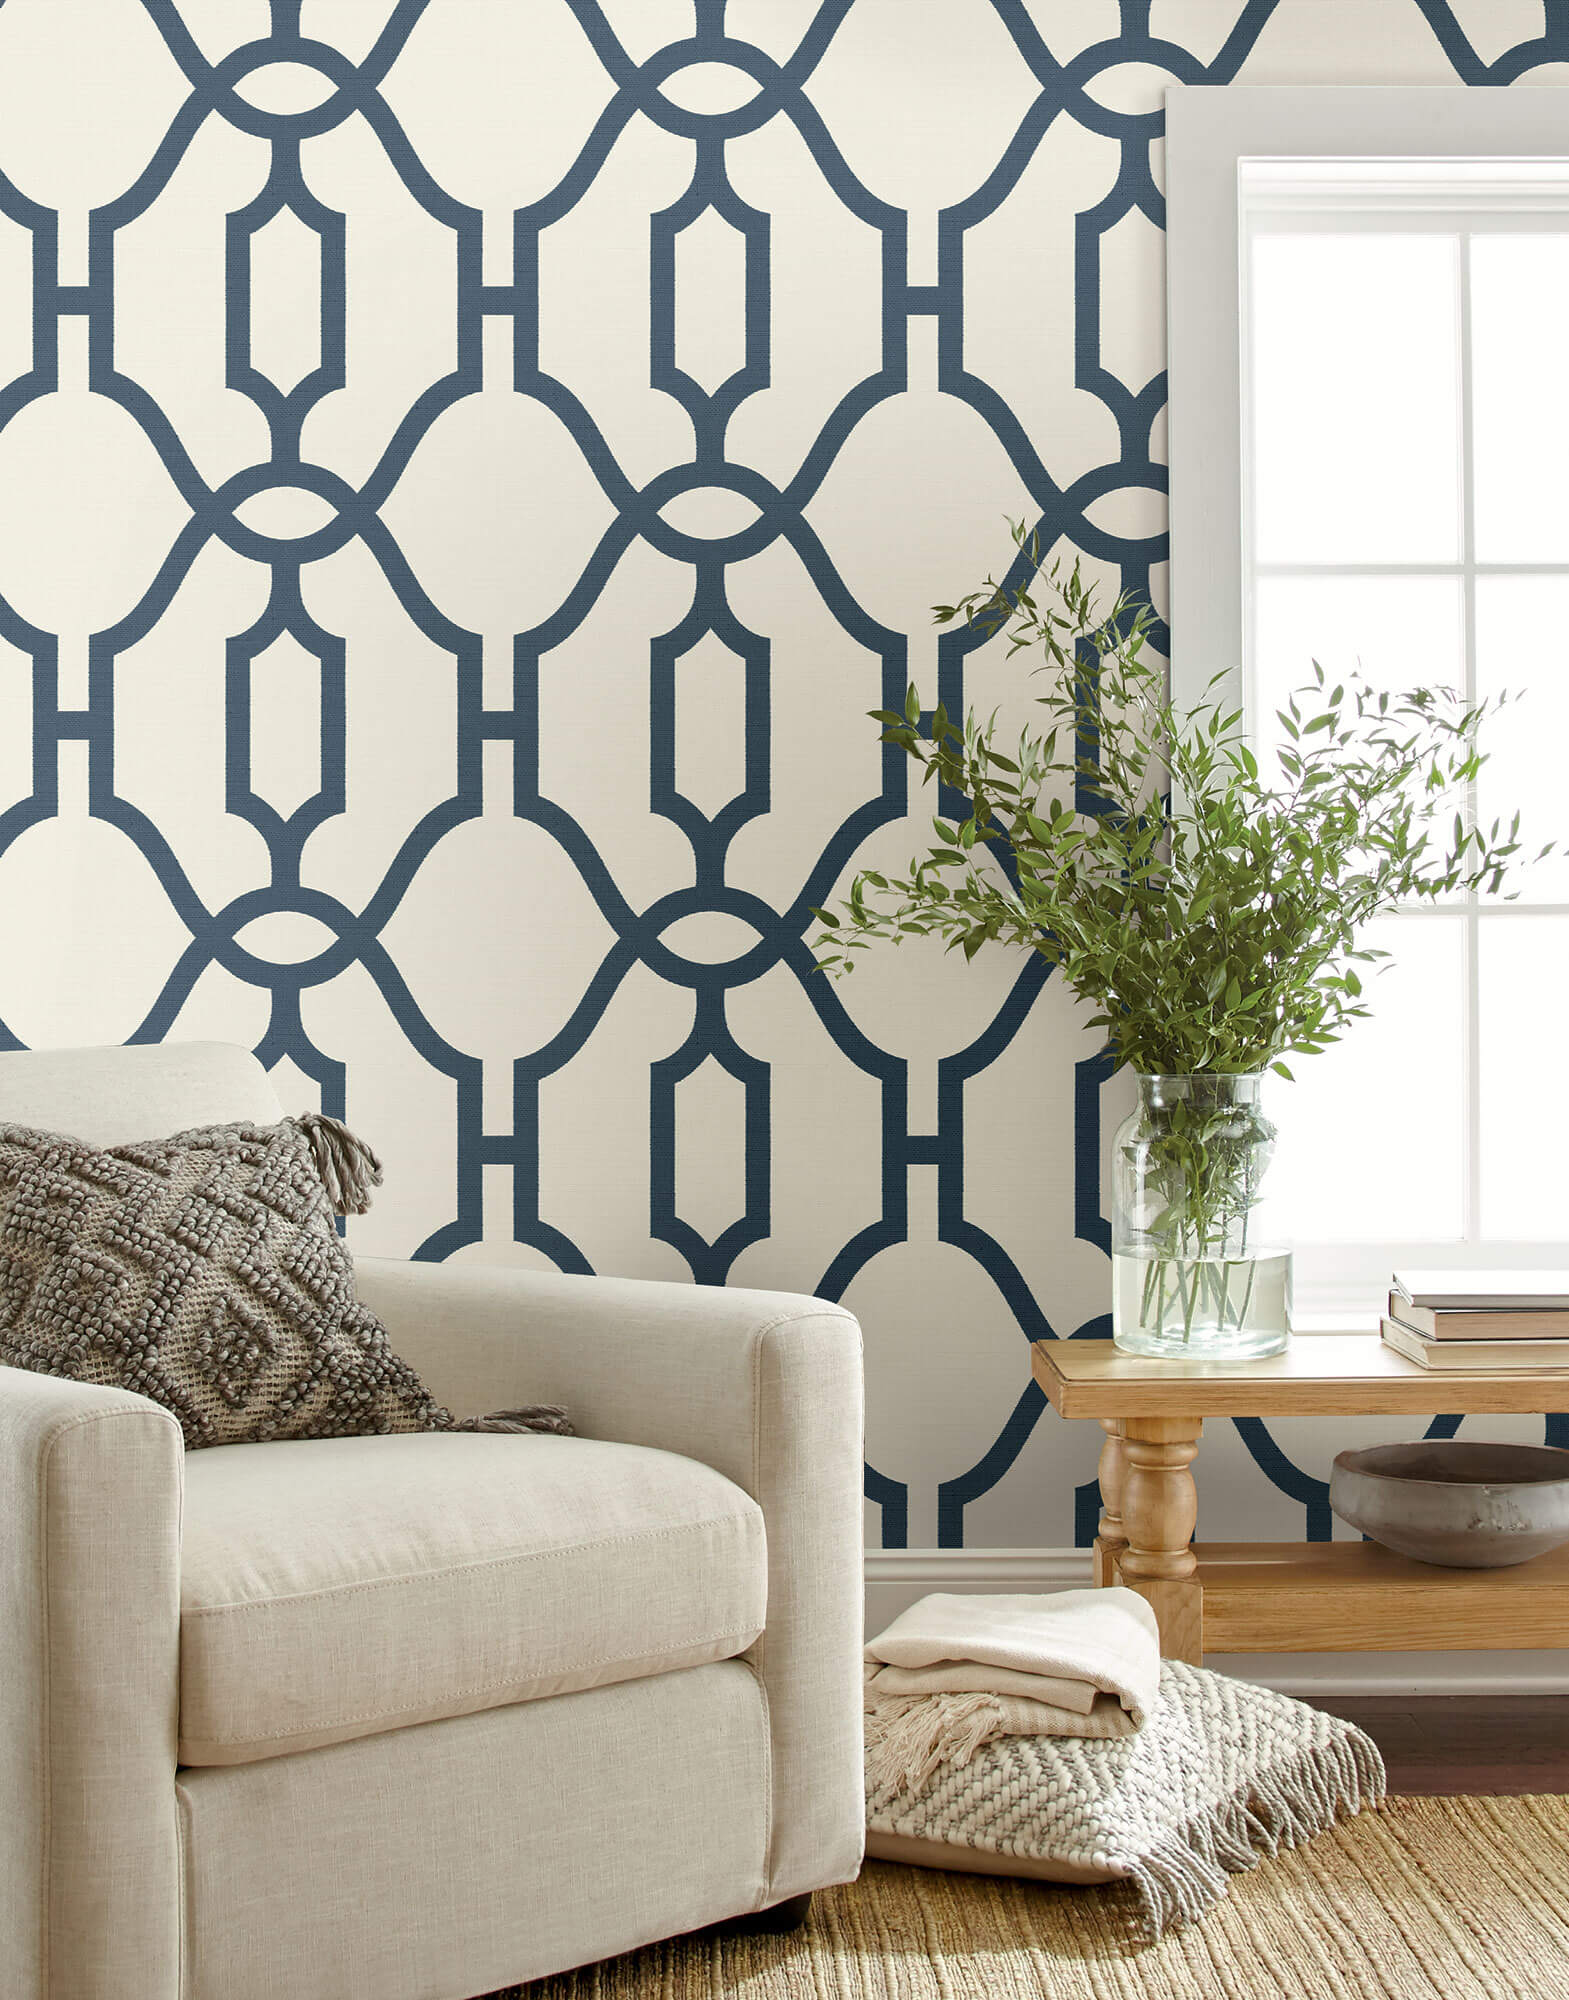 Removable wallpaper review Its a decor gamechanger  Reviewed